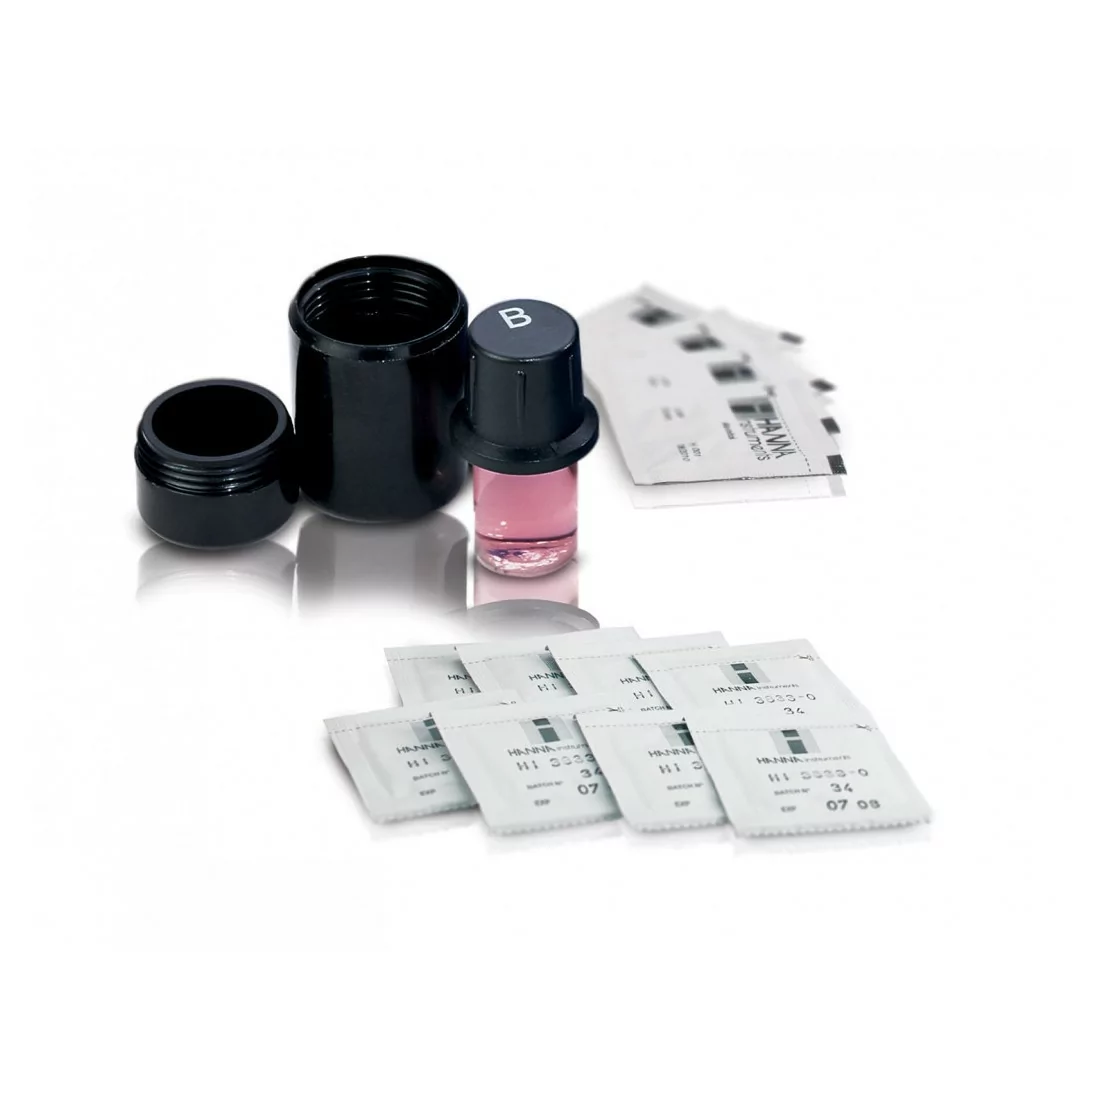 Reagents for Photometer series HI 83 and TI 96 (NH4)